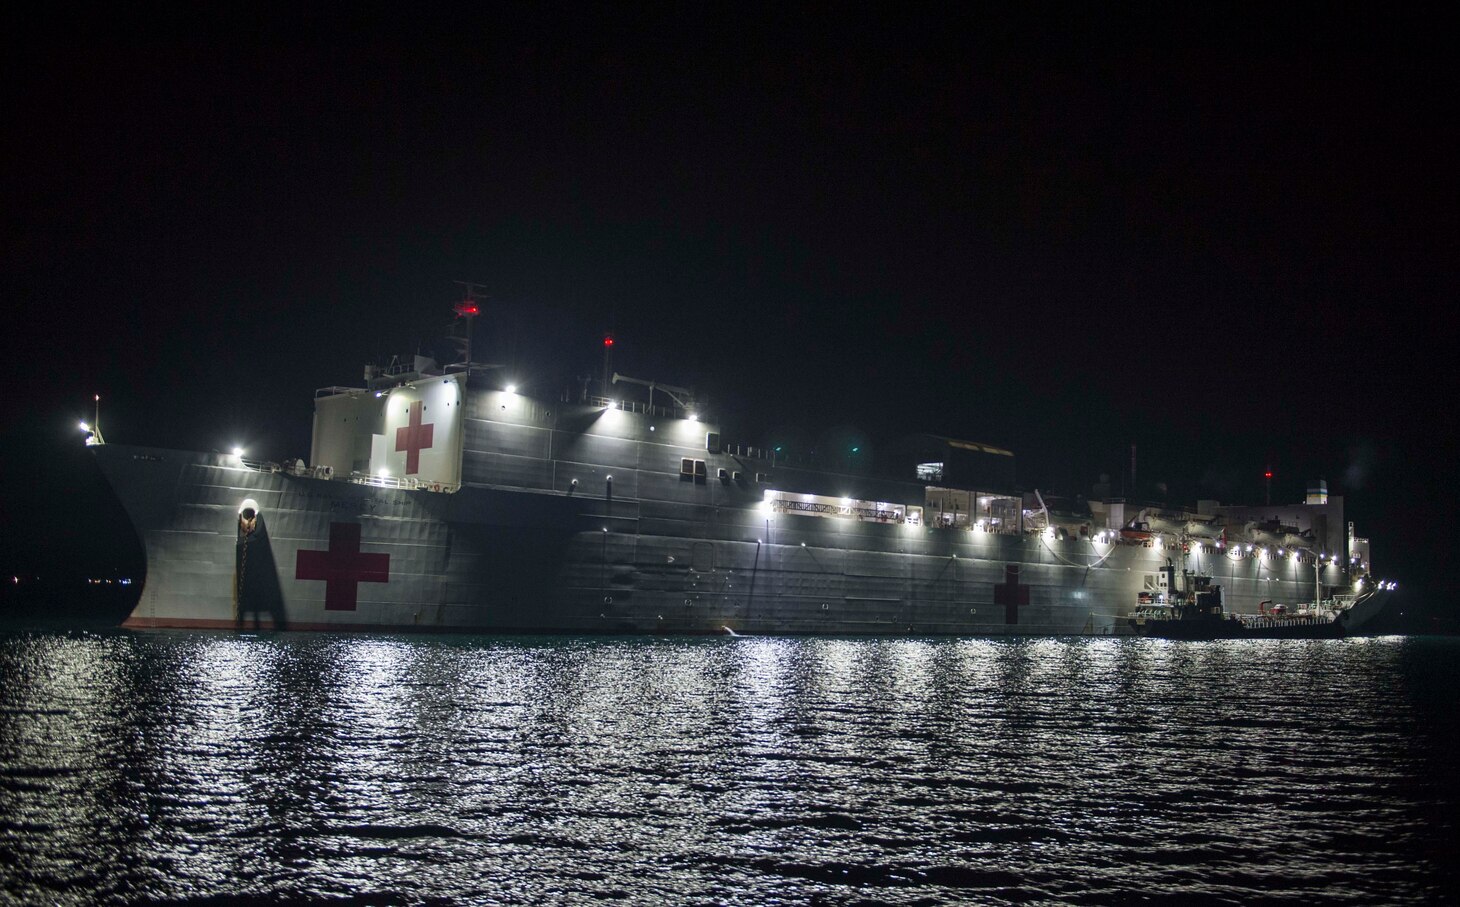 Military Sealift Command hospital ship USNS Mercy’s (T-AH 19) sits anchored off the coast of Trincomolee, Sri Lanka in support of Pacific Partnership 2018 (PP18).  PP18’s mission is to work collectively with host and partner nations to enhance regional interoperability and disaster response capabilities, increase stability and security in the region, and foster new and enduring friendships across the Indo-Pacific Region. Pacific Partnership, now in its 13th iteration, is the largest annual multinational humanitarian assistance and disaster relief preparedness mission conducted in the Indo-Pacific.